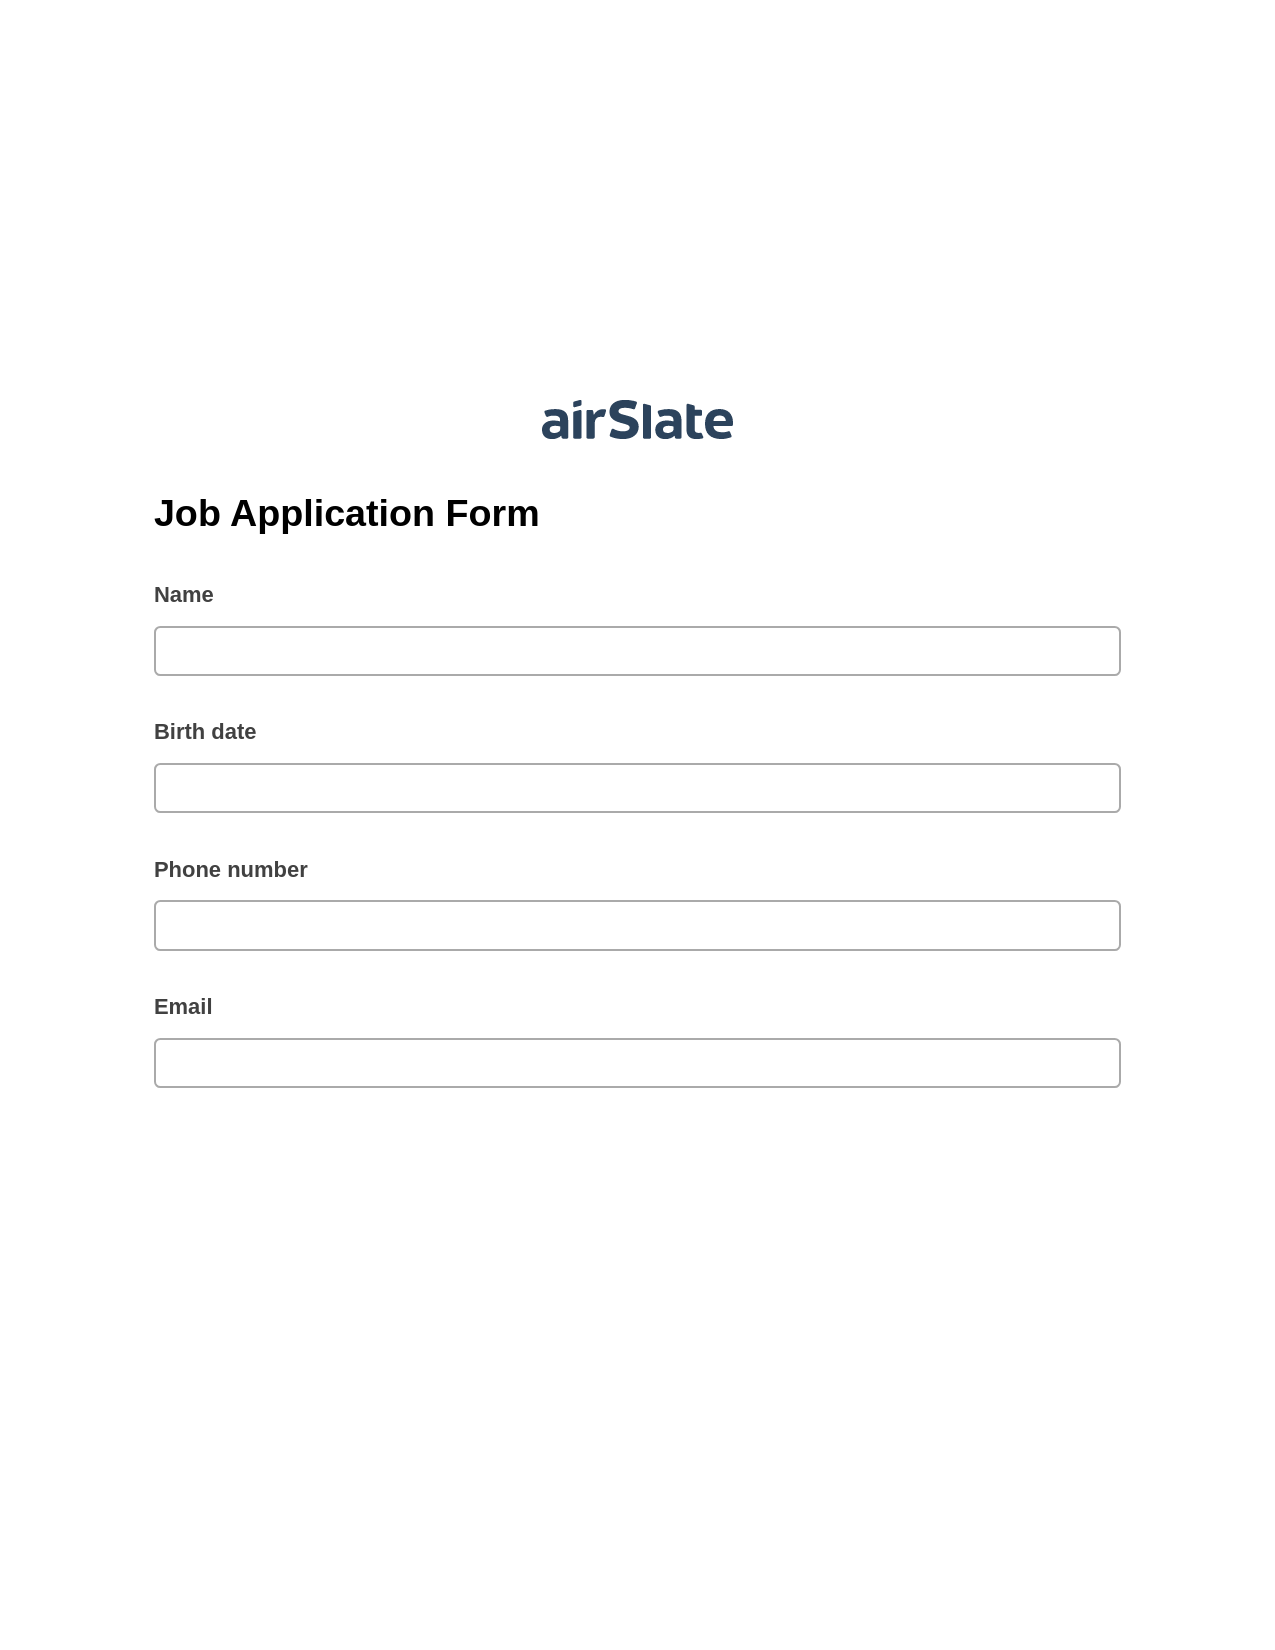 Job Application Form Pre-fill from CSV File Bot, System Bot - Create a Slate in another Flow, Webhook Postfinish Bot